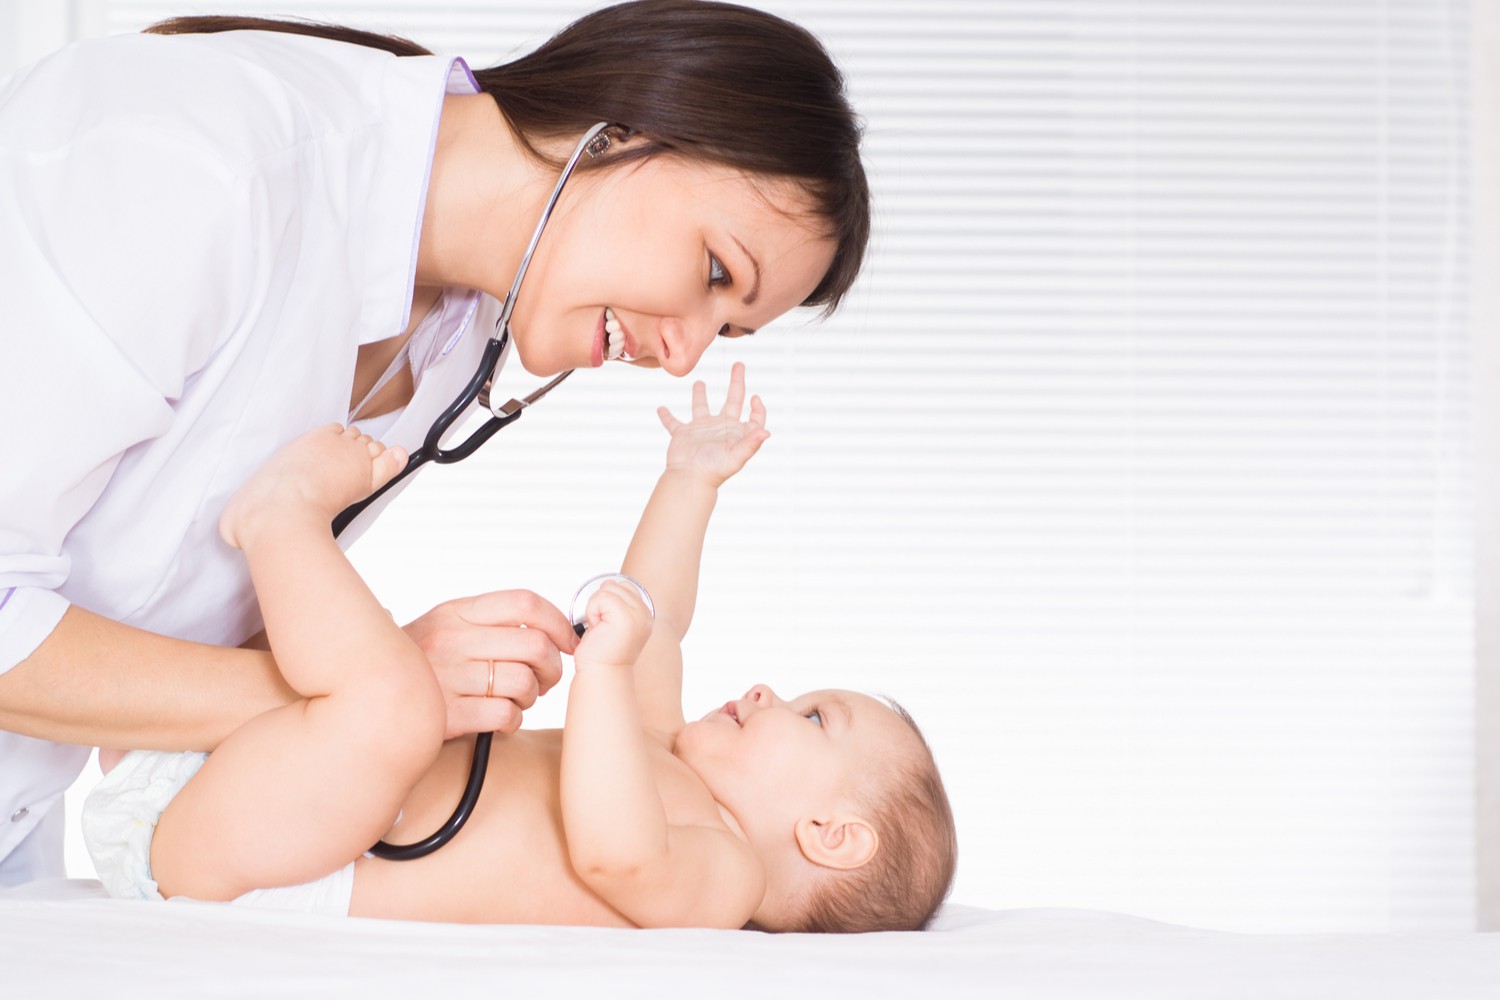 When to call the doctor for vomiting in babies